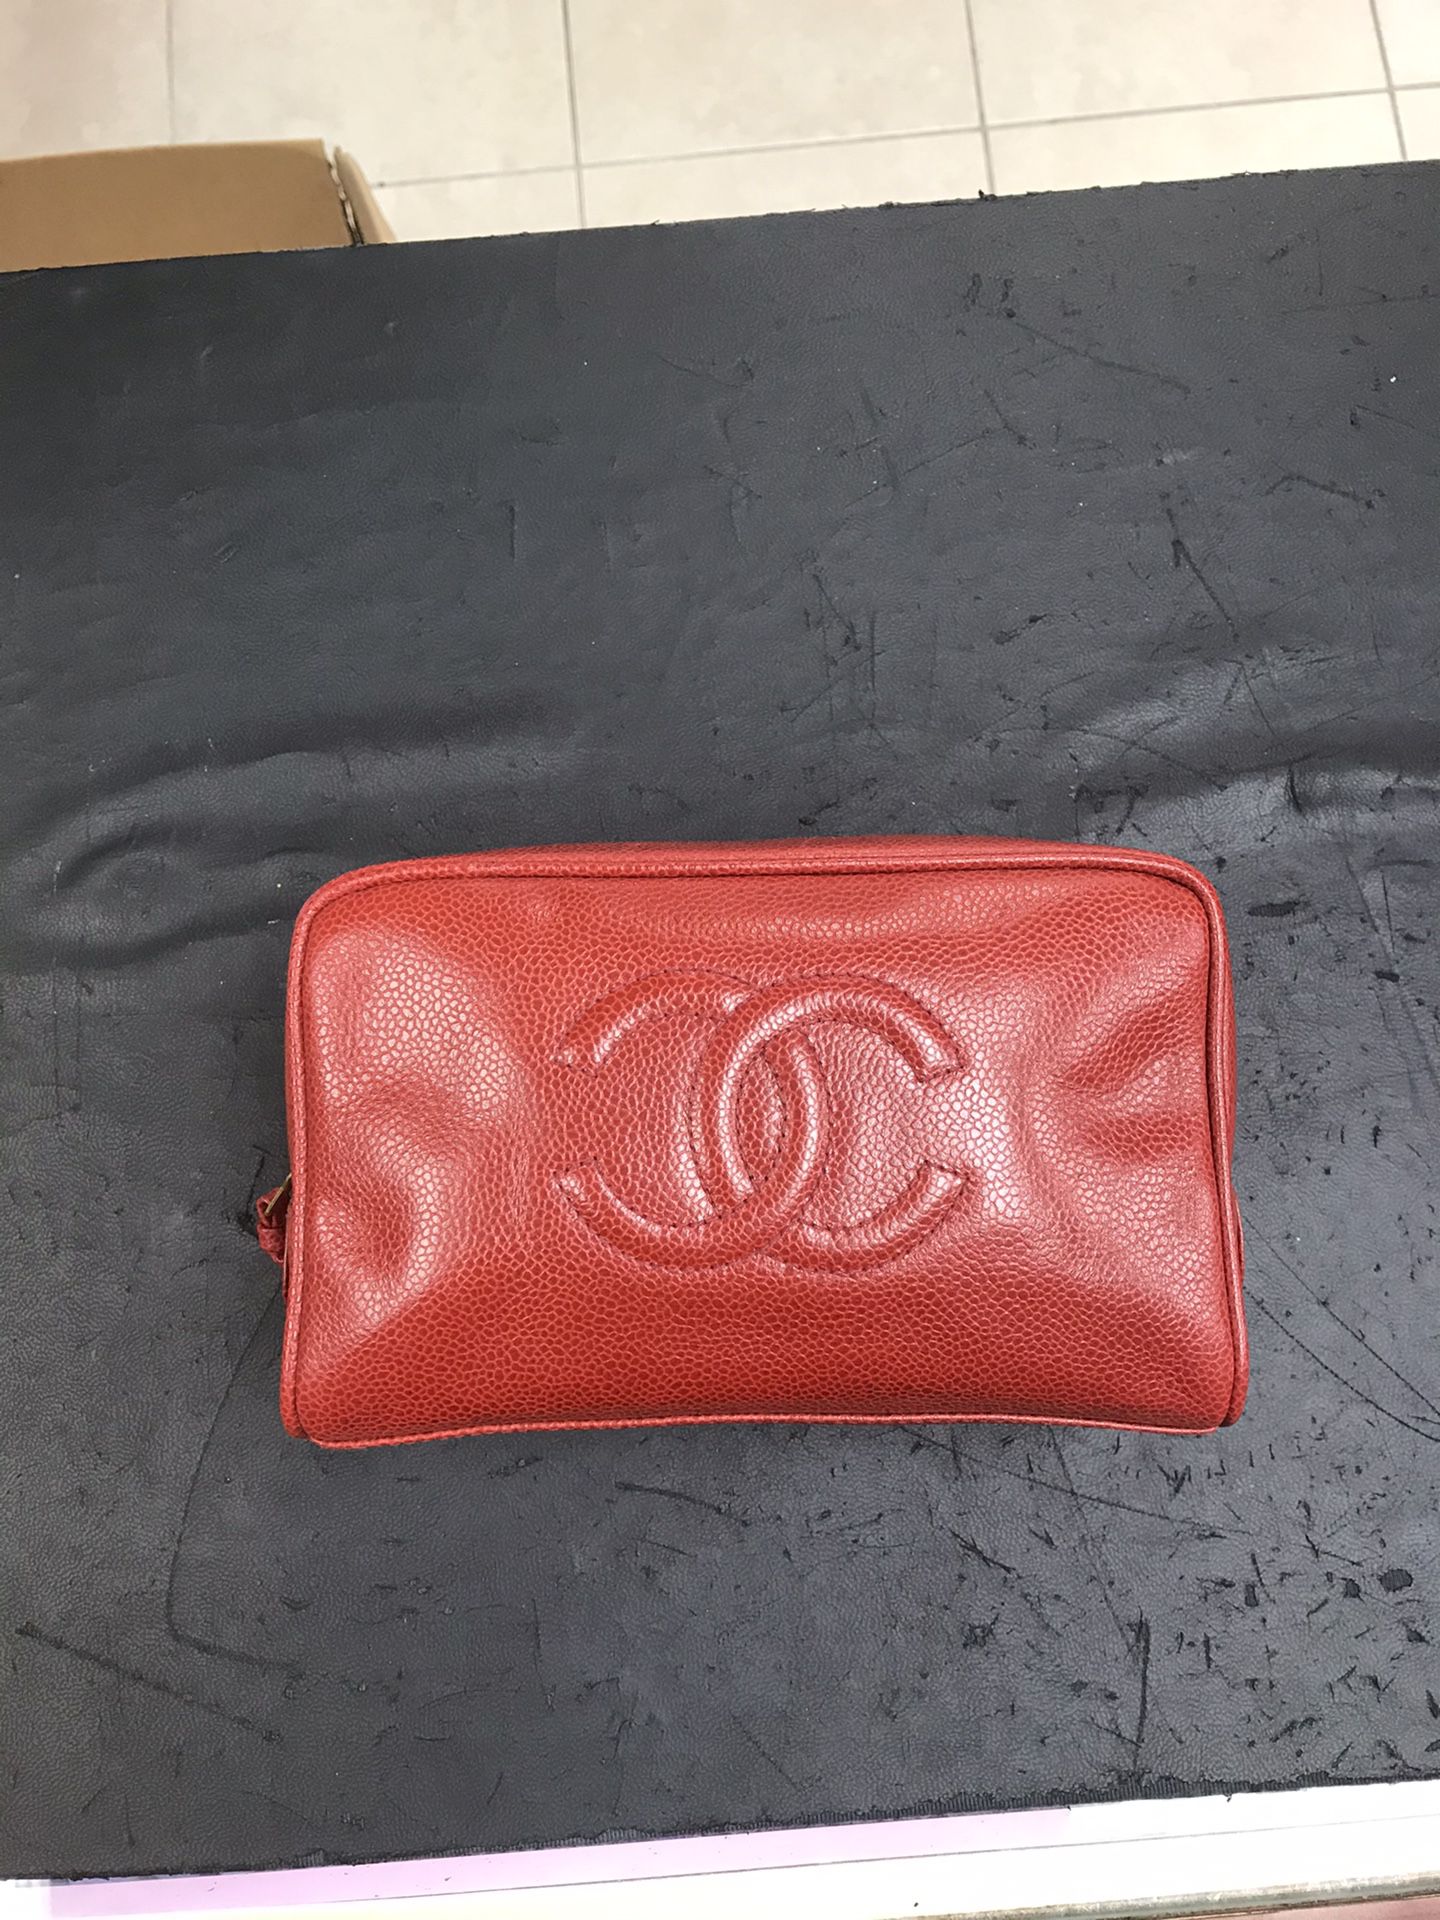 Coco Chanel Makeup Bag in Great Condition. 9x5x4